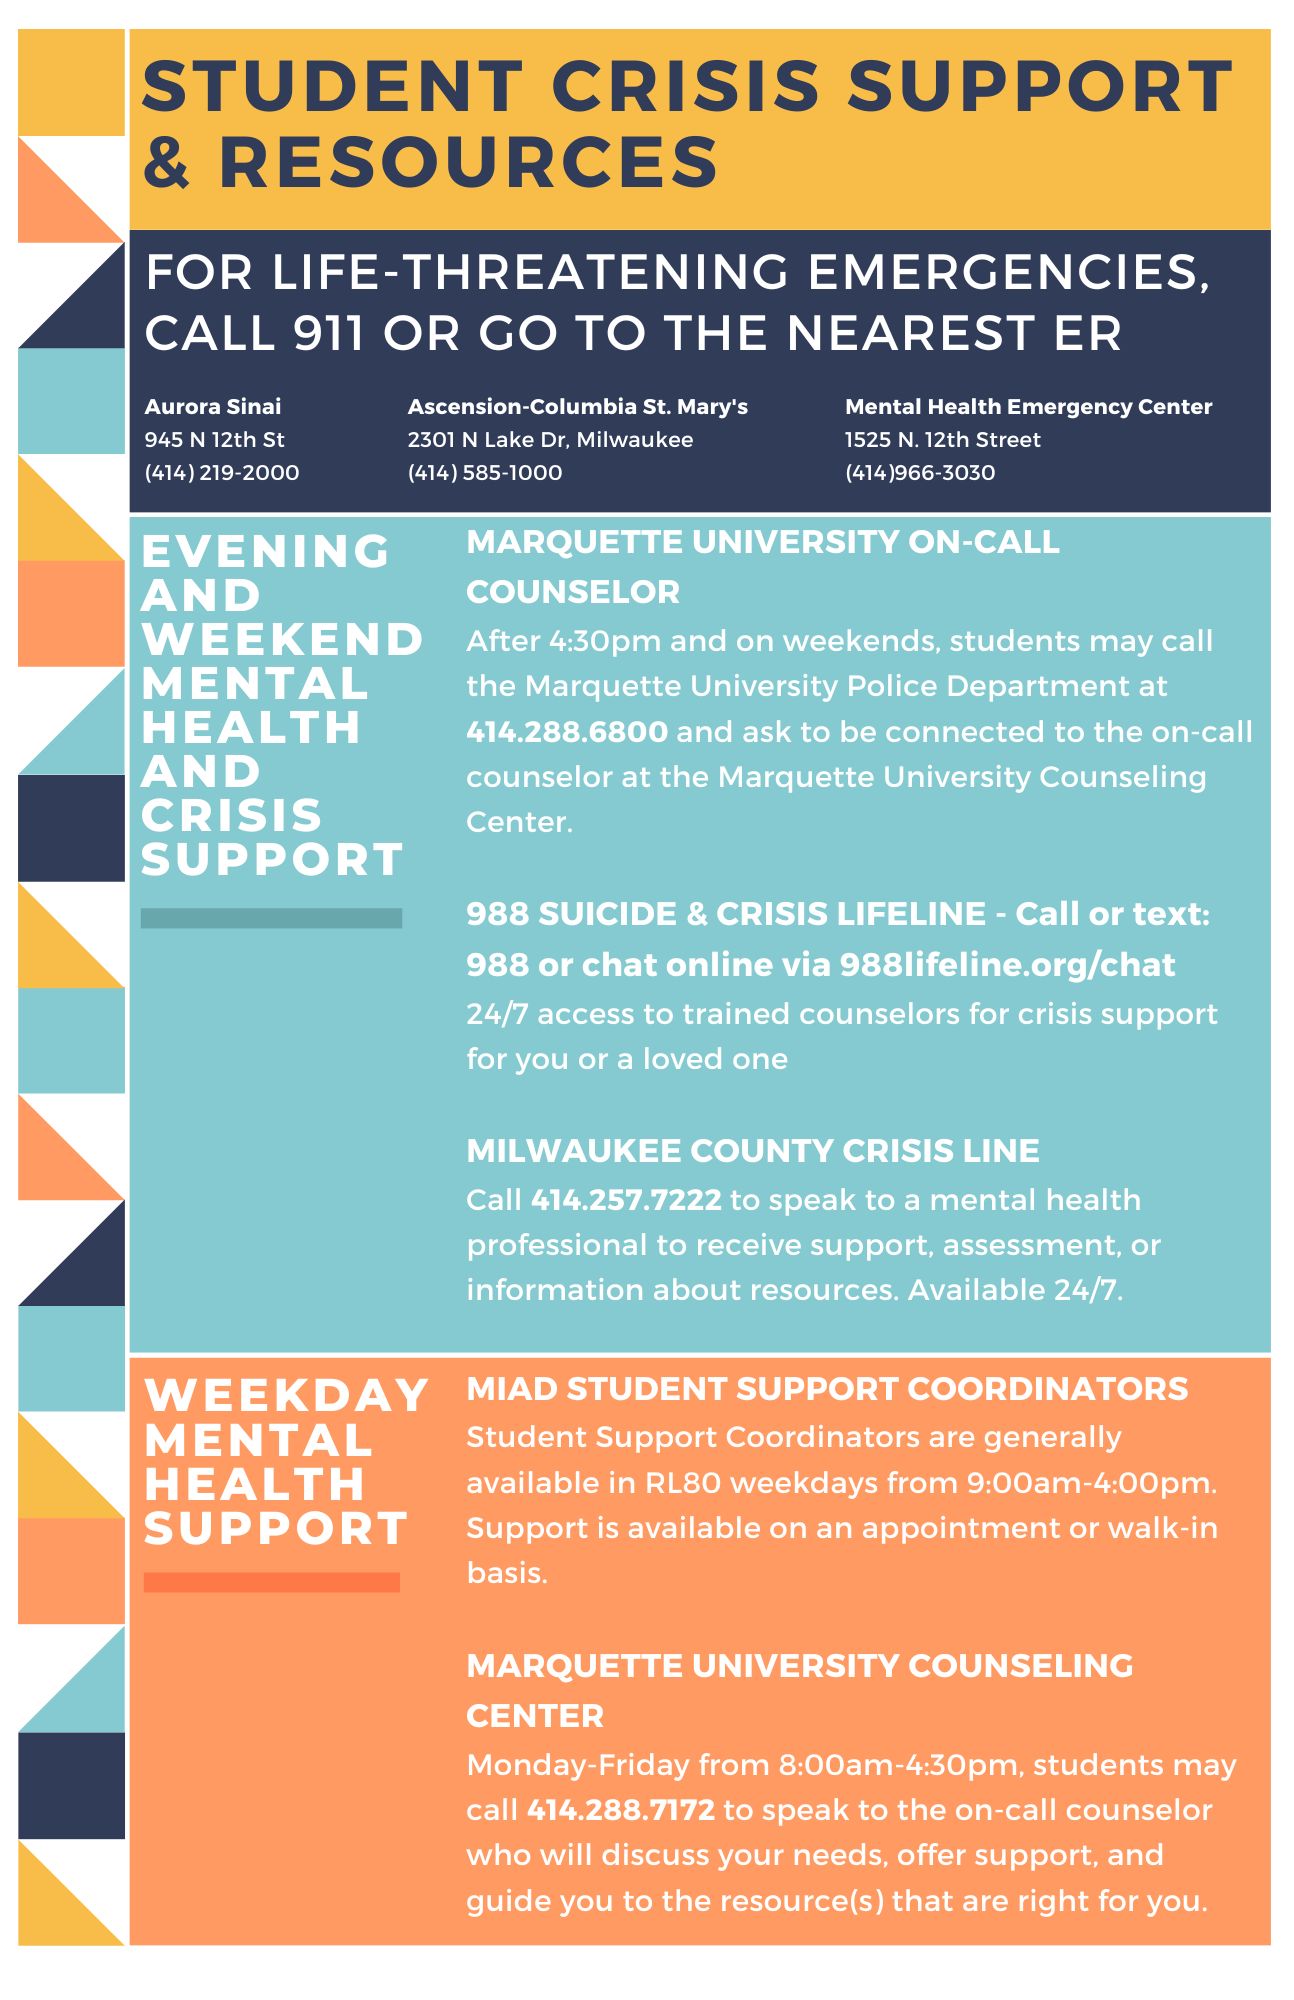 Crisis Support & Mental Health Resources For Students